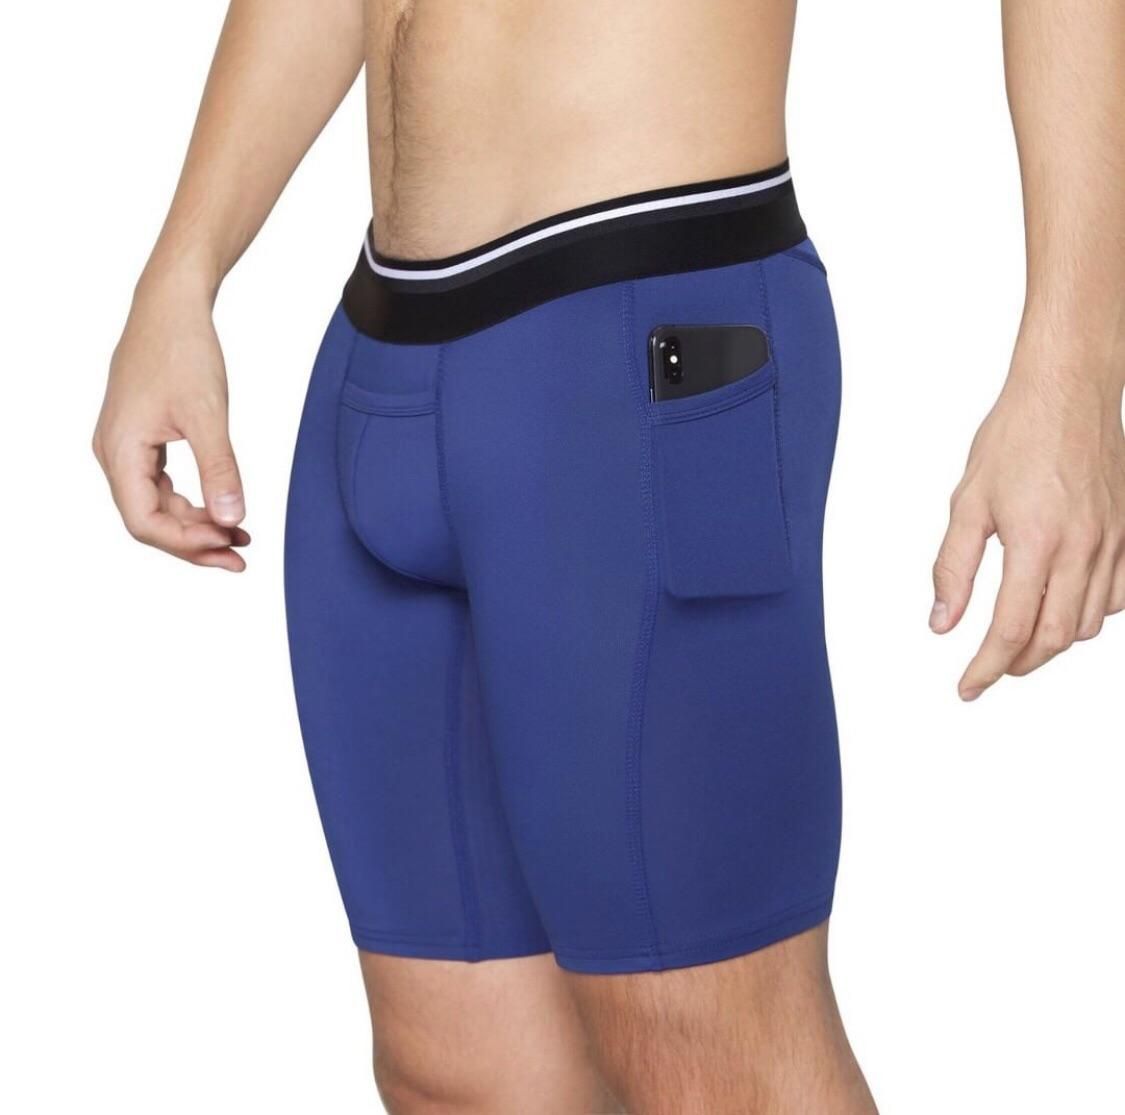 Ladies... We are evolving. Our underpants now have pockets.